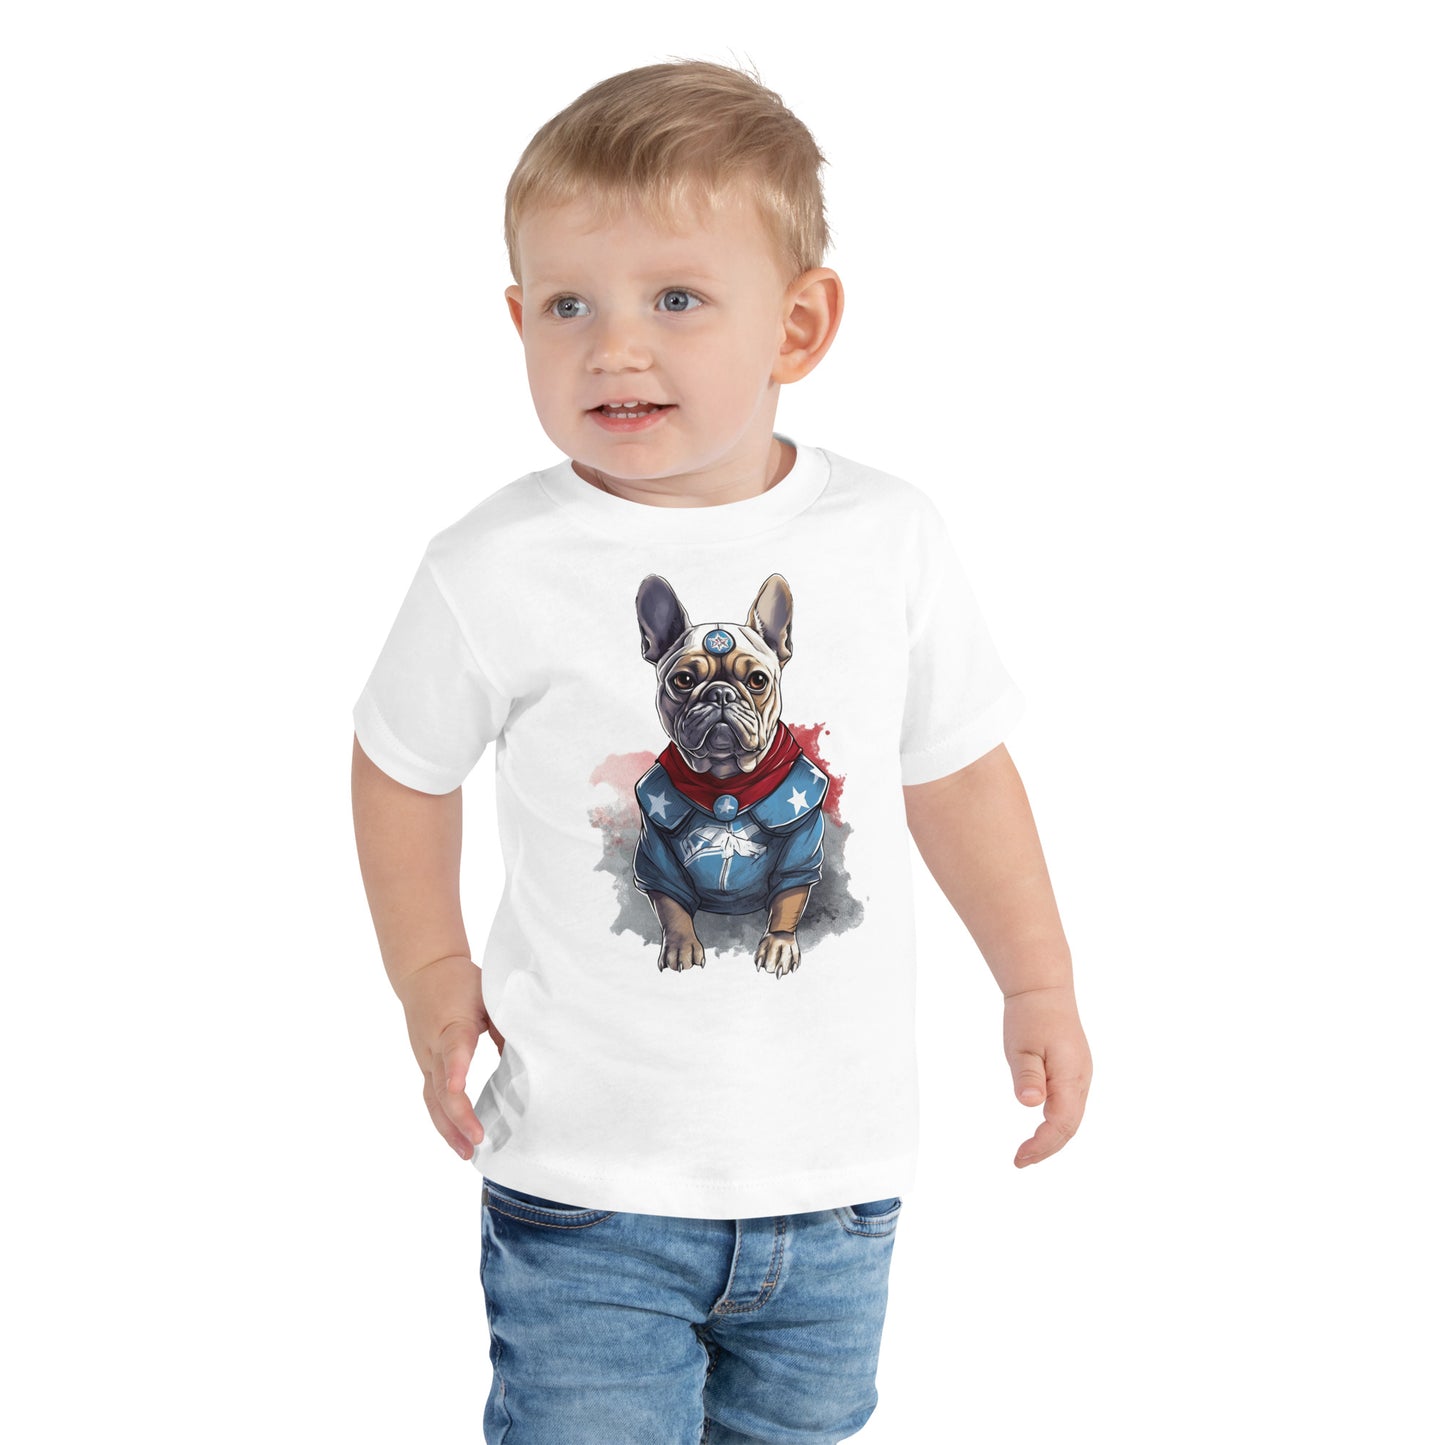 Adorable Kids' Frenchie T-Shirt: Trendy and Stylish for Little Fashionistas